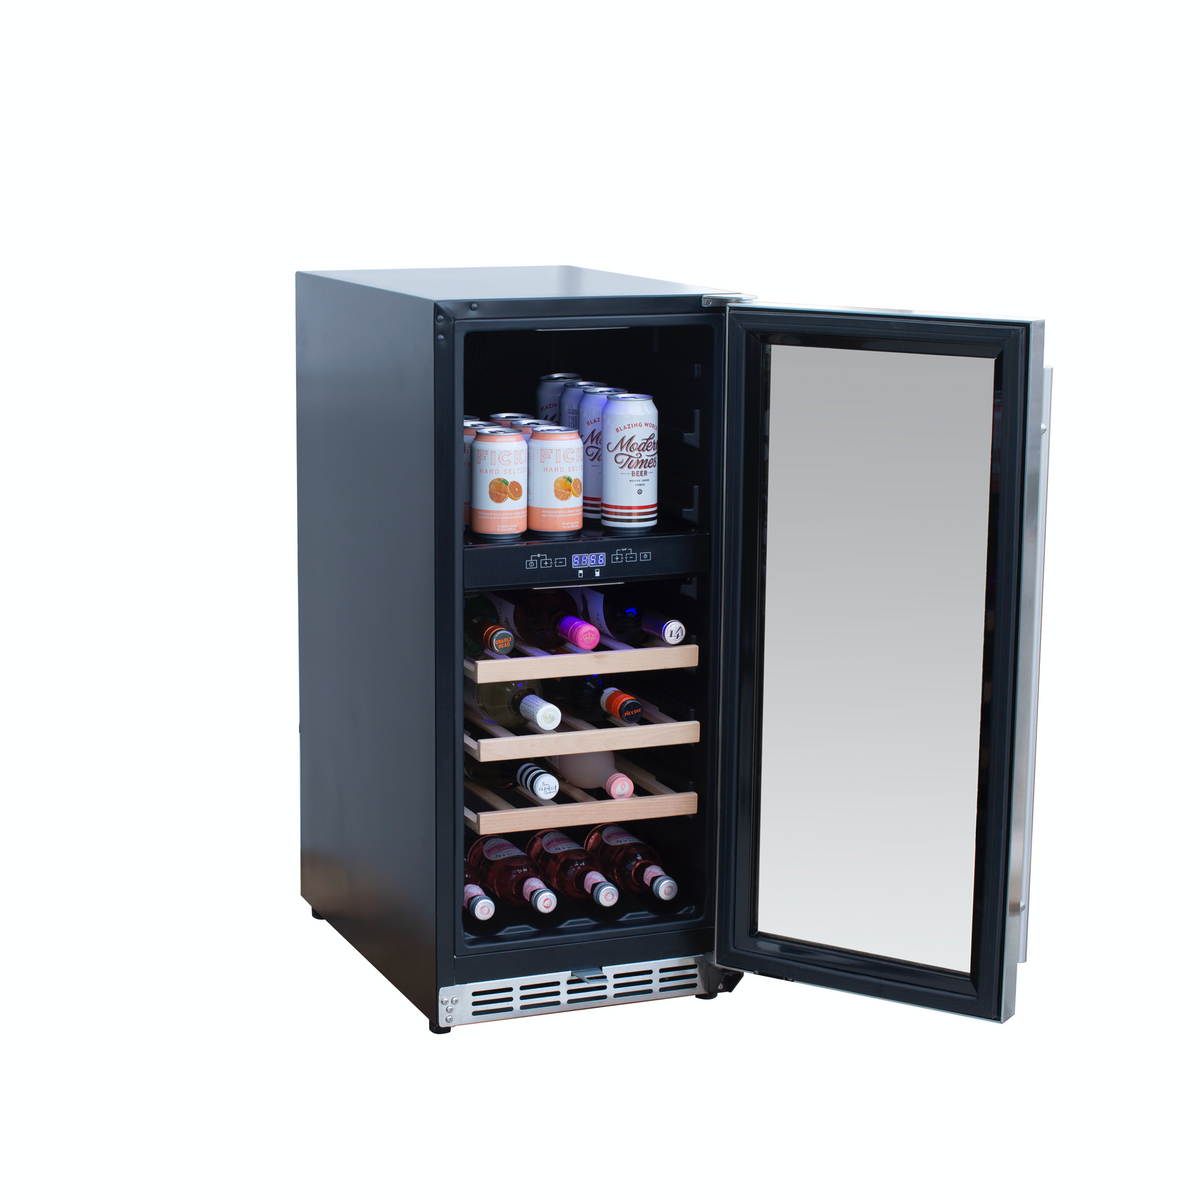 15" 3.2C Outdoor Rated Dual Zone Wine Cooler